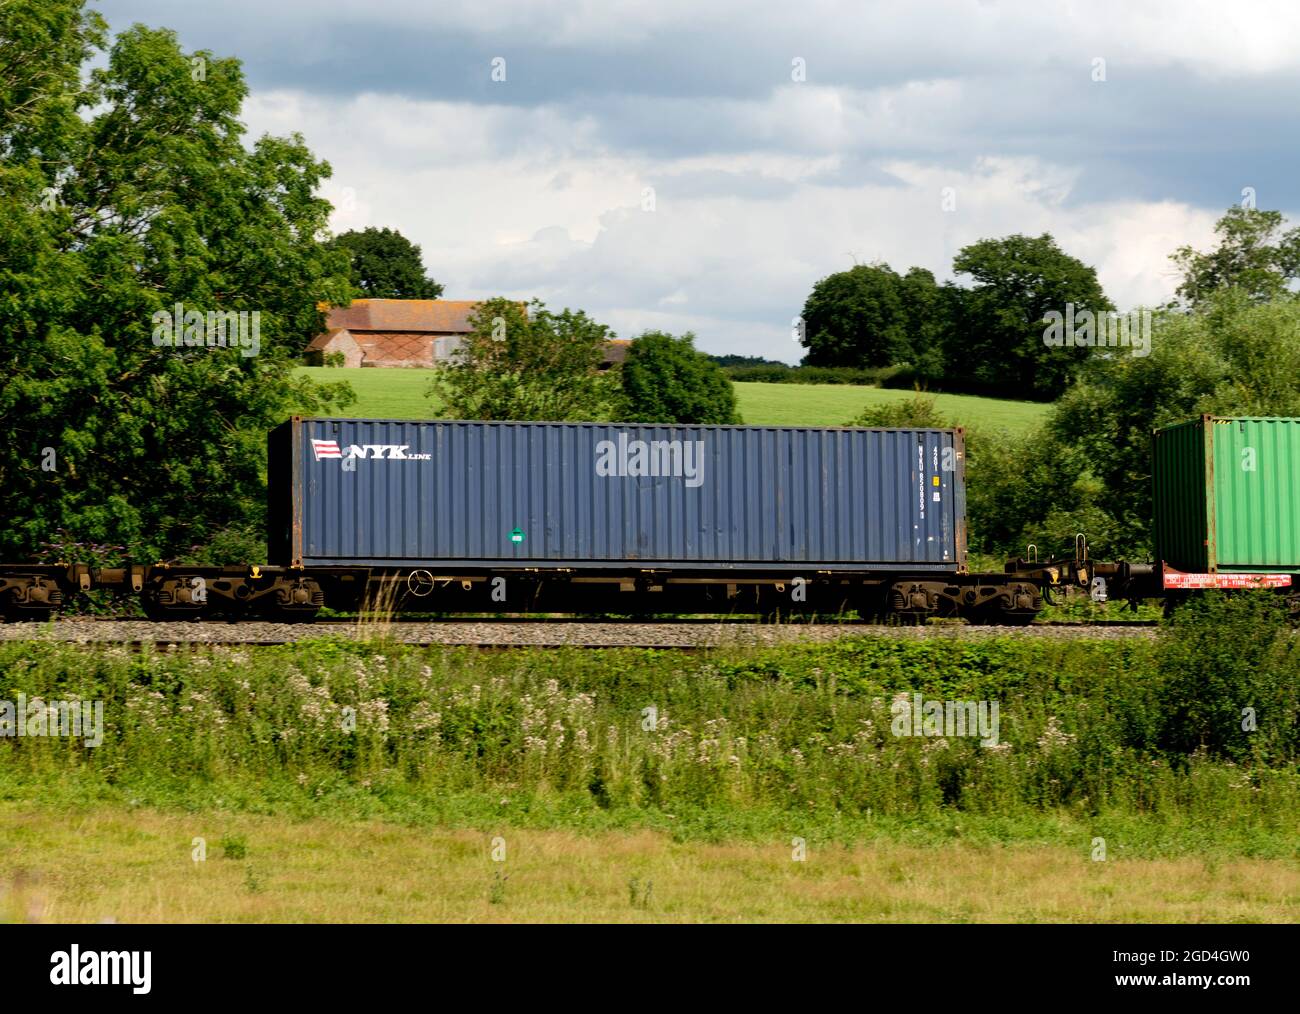 NYK Line shipping container on a freightliner train, Warwickshire, UK Stock Photo